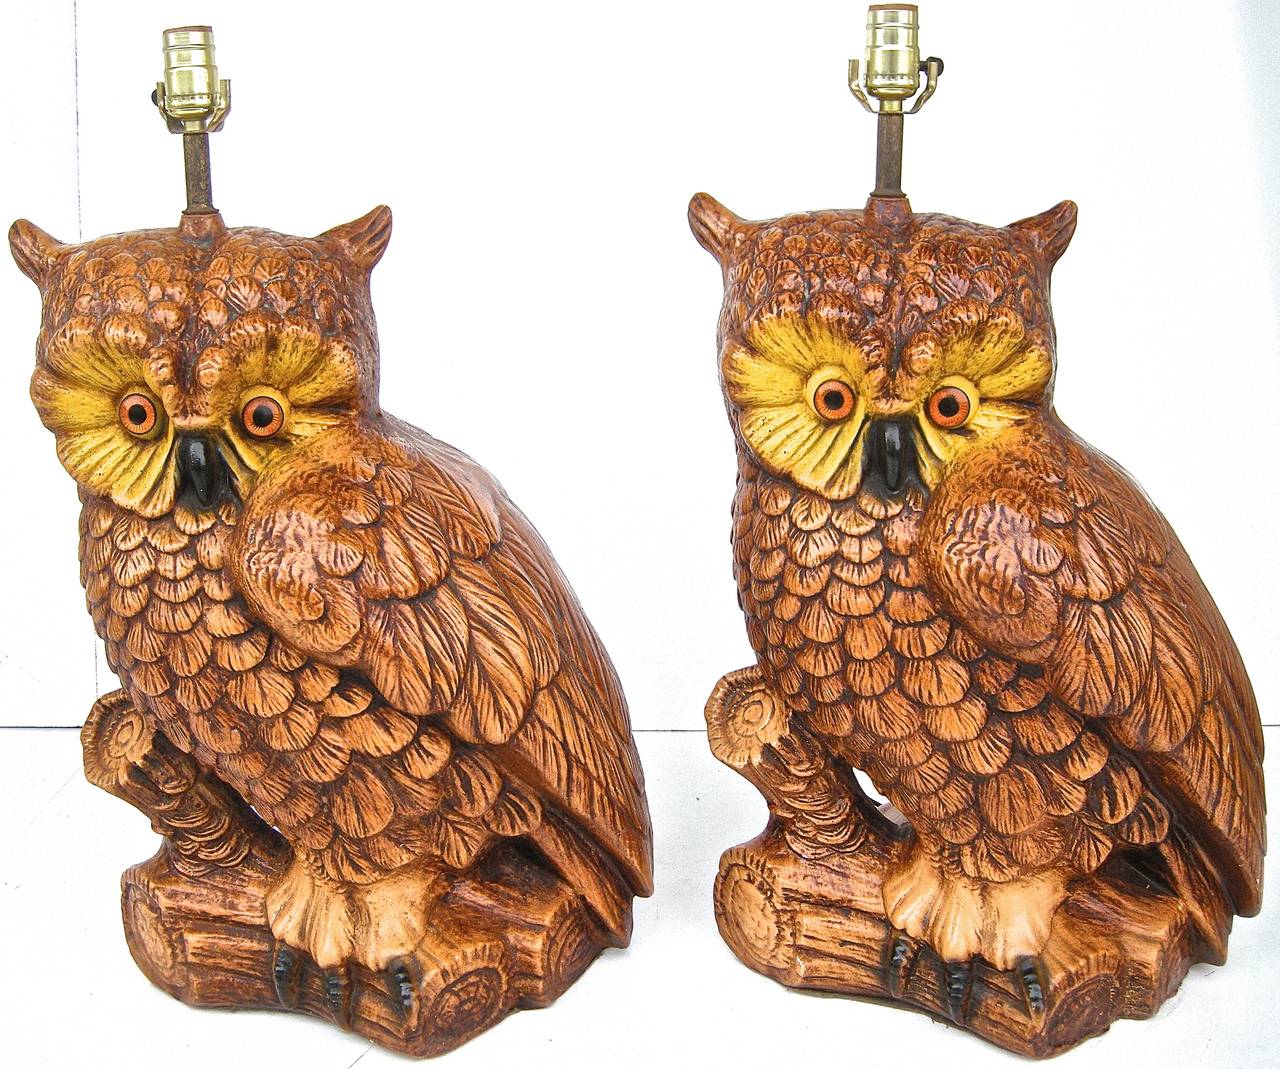 Wonderful pair of striking, vintage, overscale lights in bold owl motifs. Graphic shapes and forms with vivid detailing. Cast ceramic with original paint. Penetrating, lifelike, glass eyes. H to top of head: 21